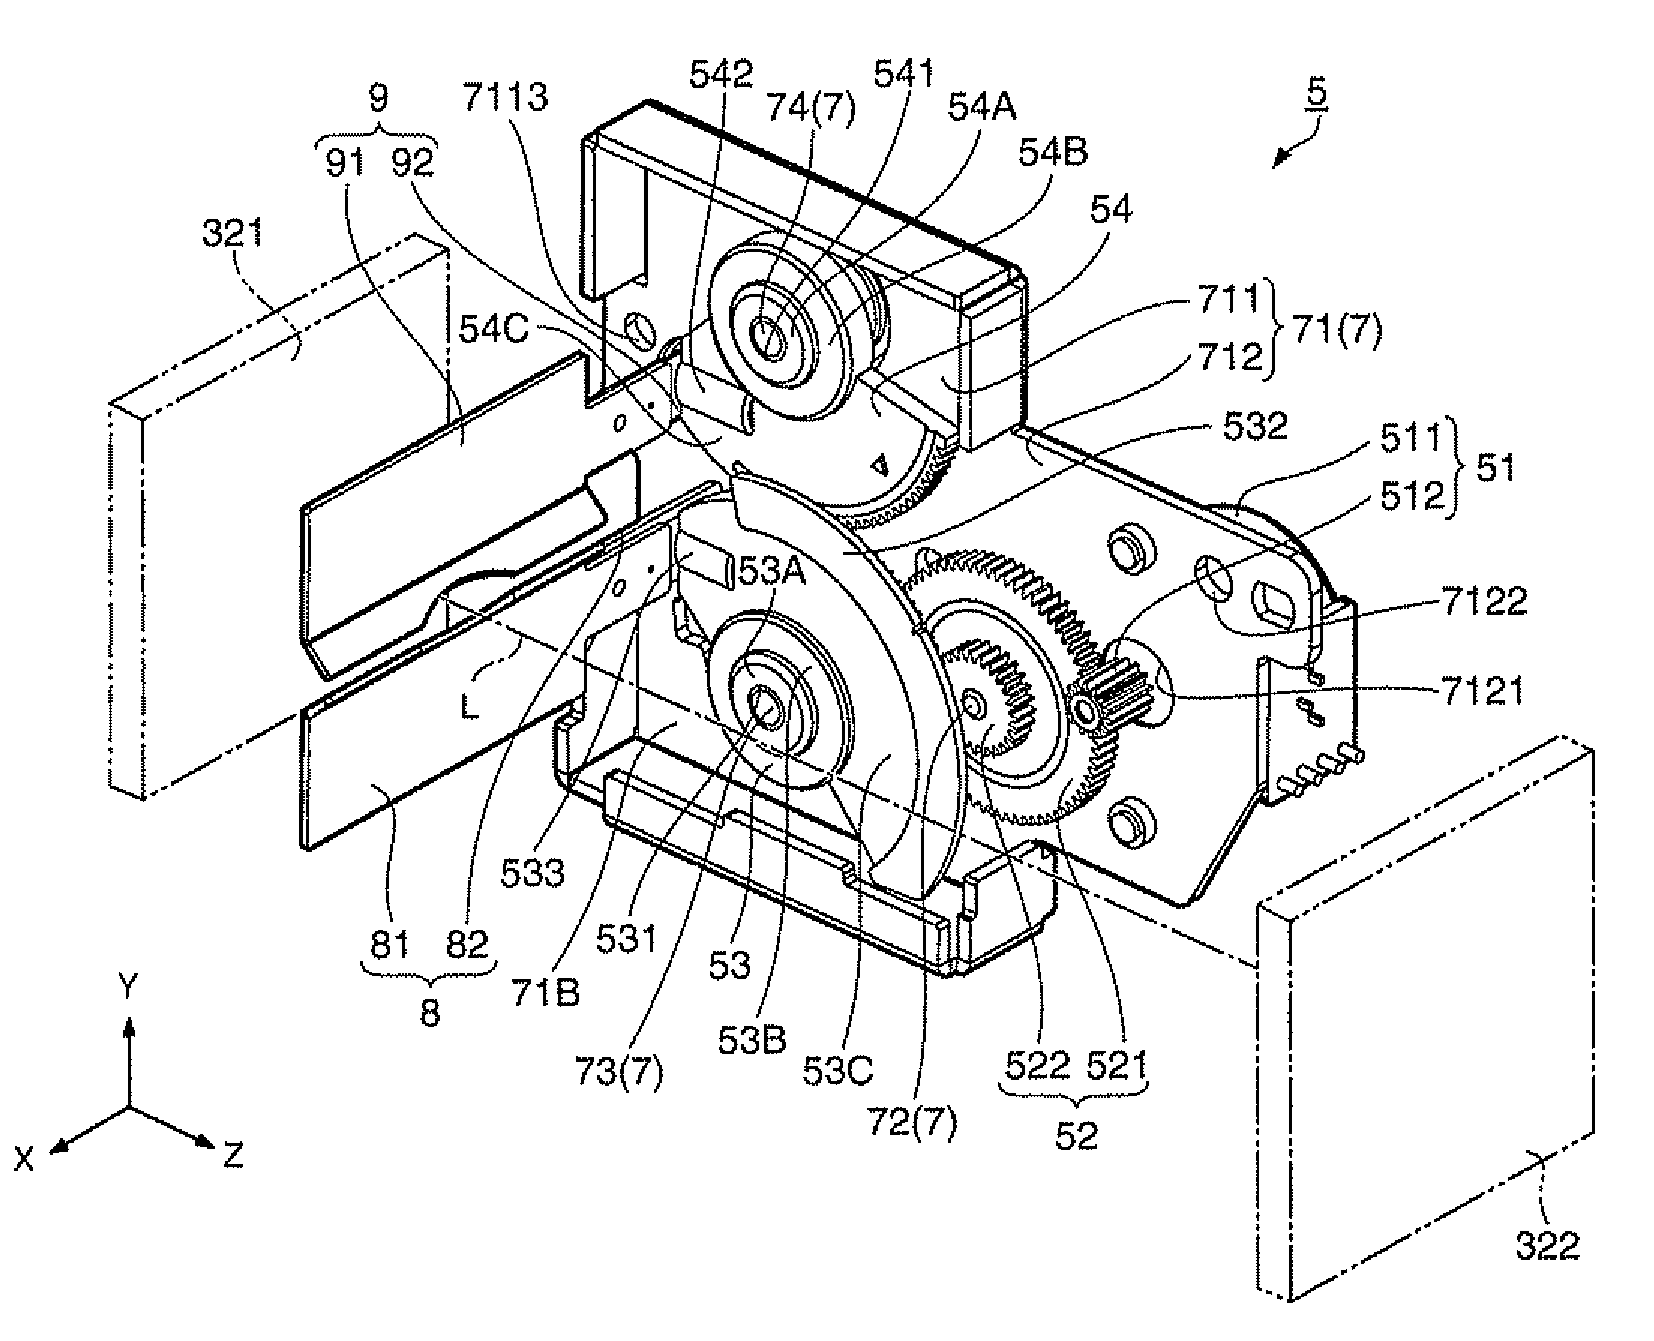 Projector with light-shielding member and holding member having varied coefficient of thermal conductivity